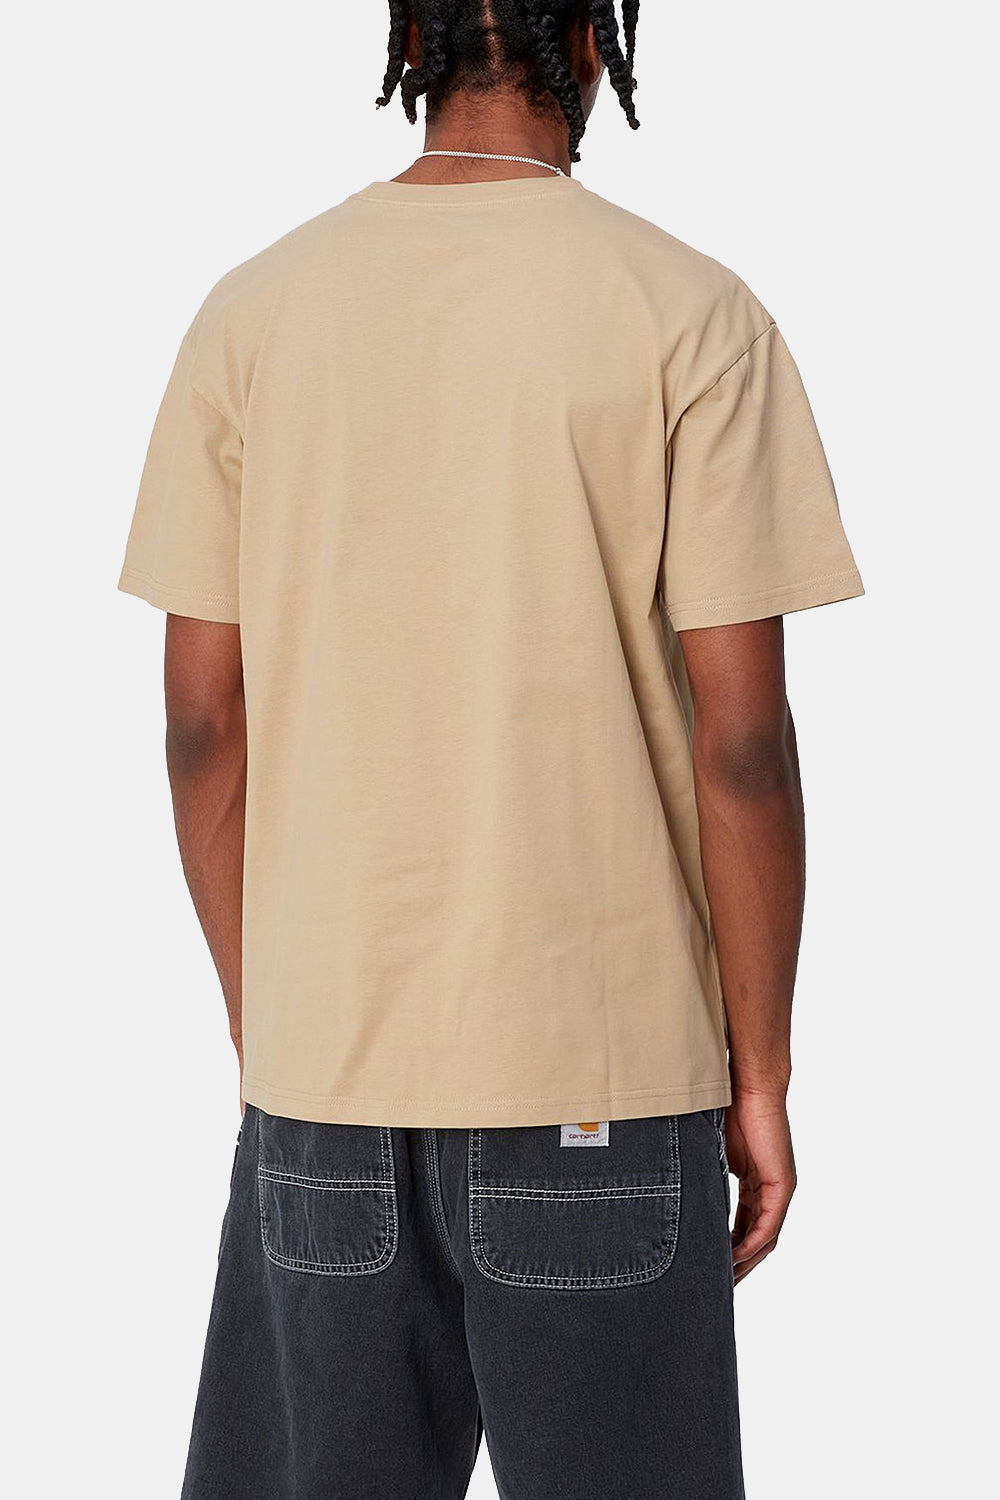 Carhartt WIP Chase T-Shirt (Sable/Gold)